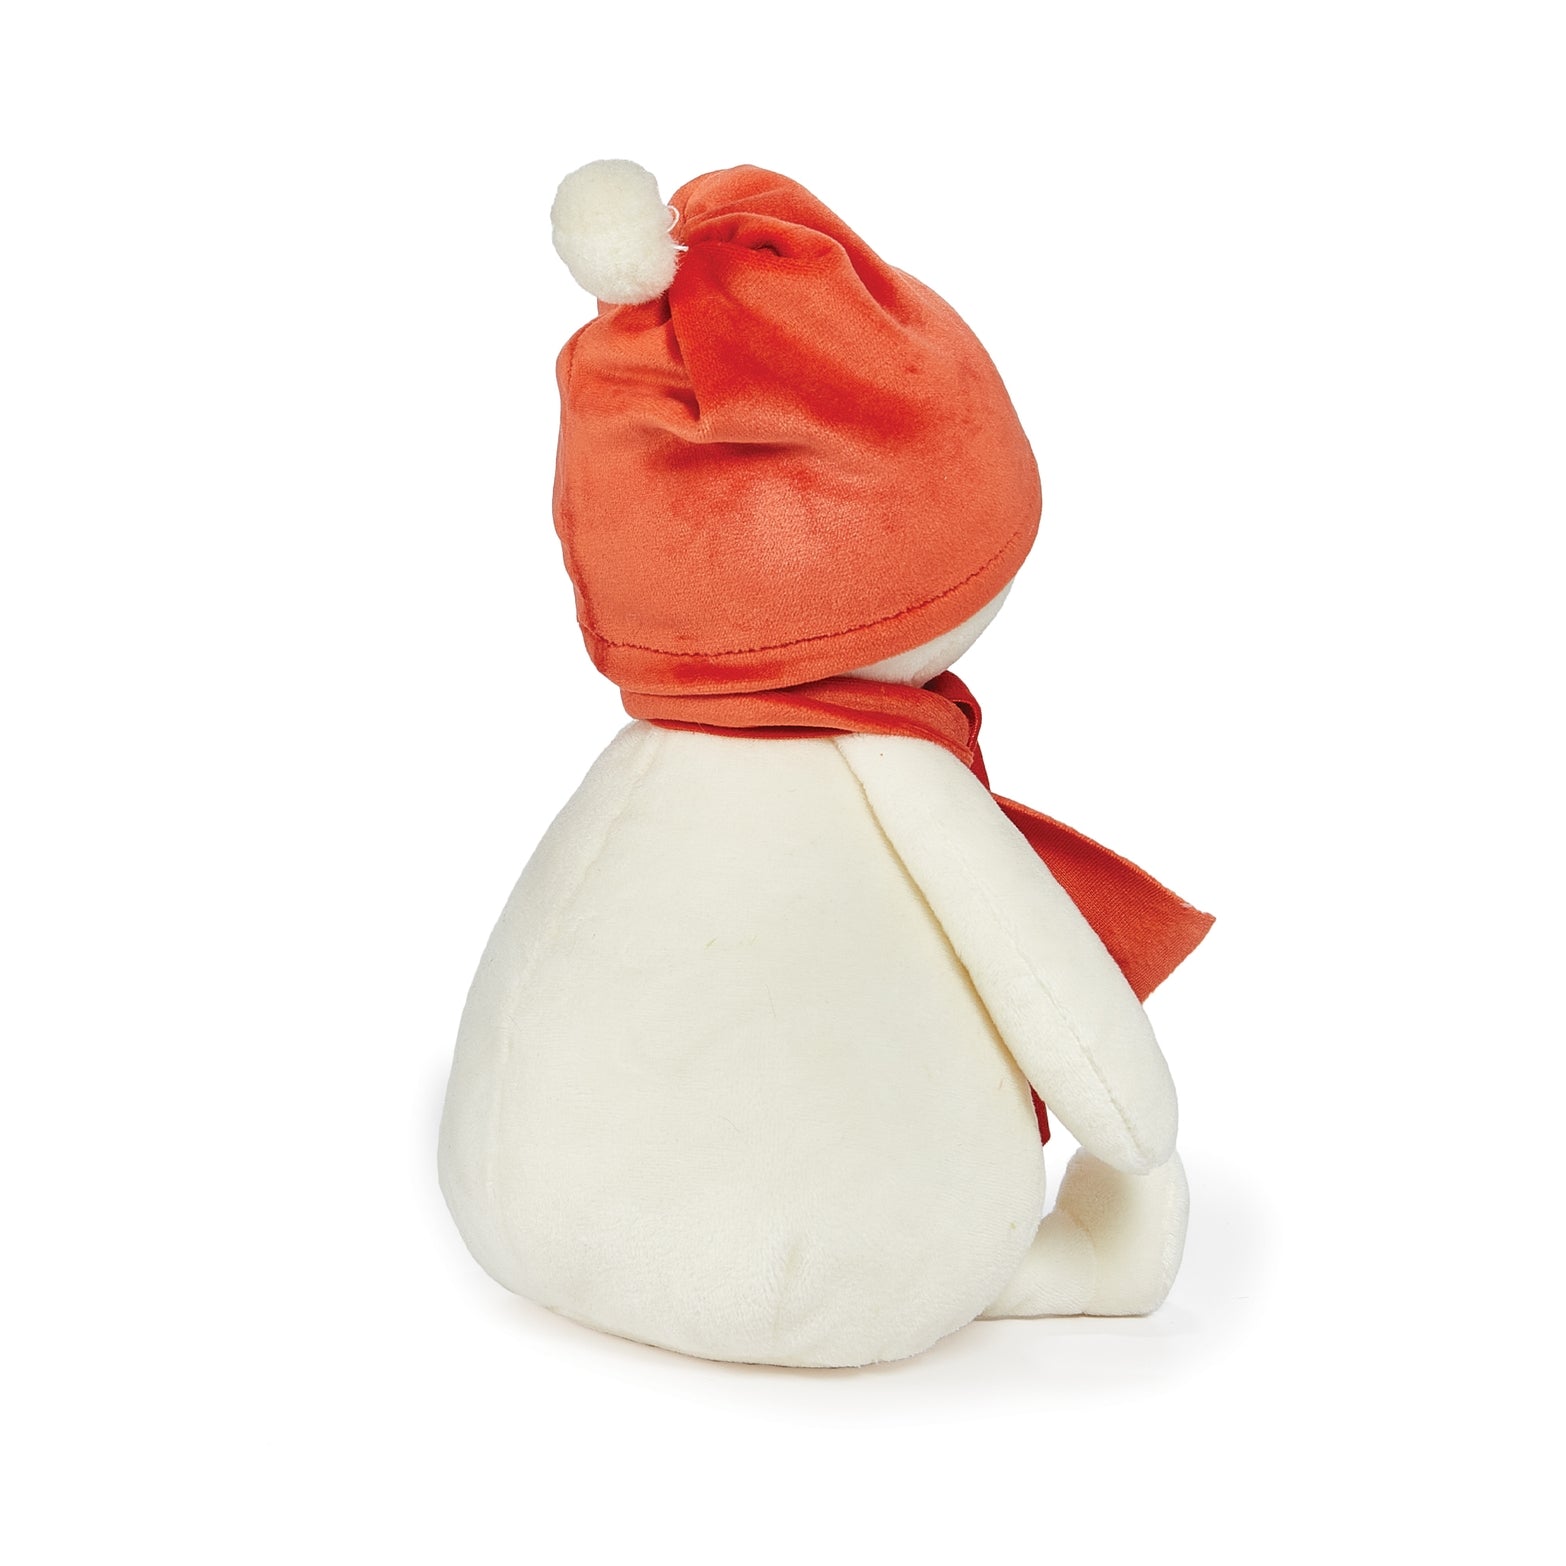 Bunnies By the Bay - Holiday Sweets "Marshmallow" - 9" (Final Sale)